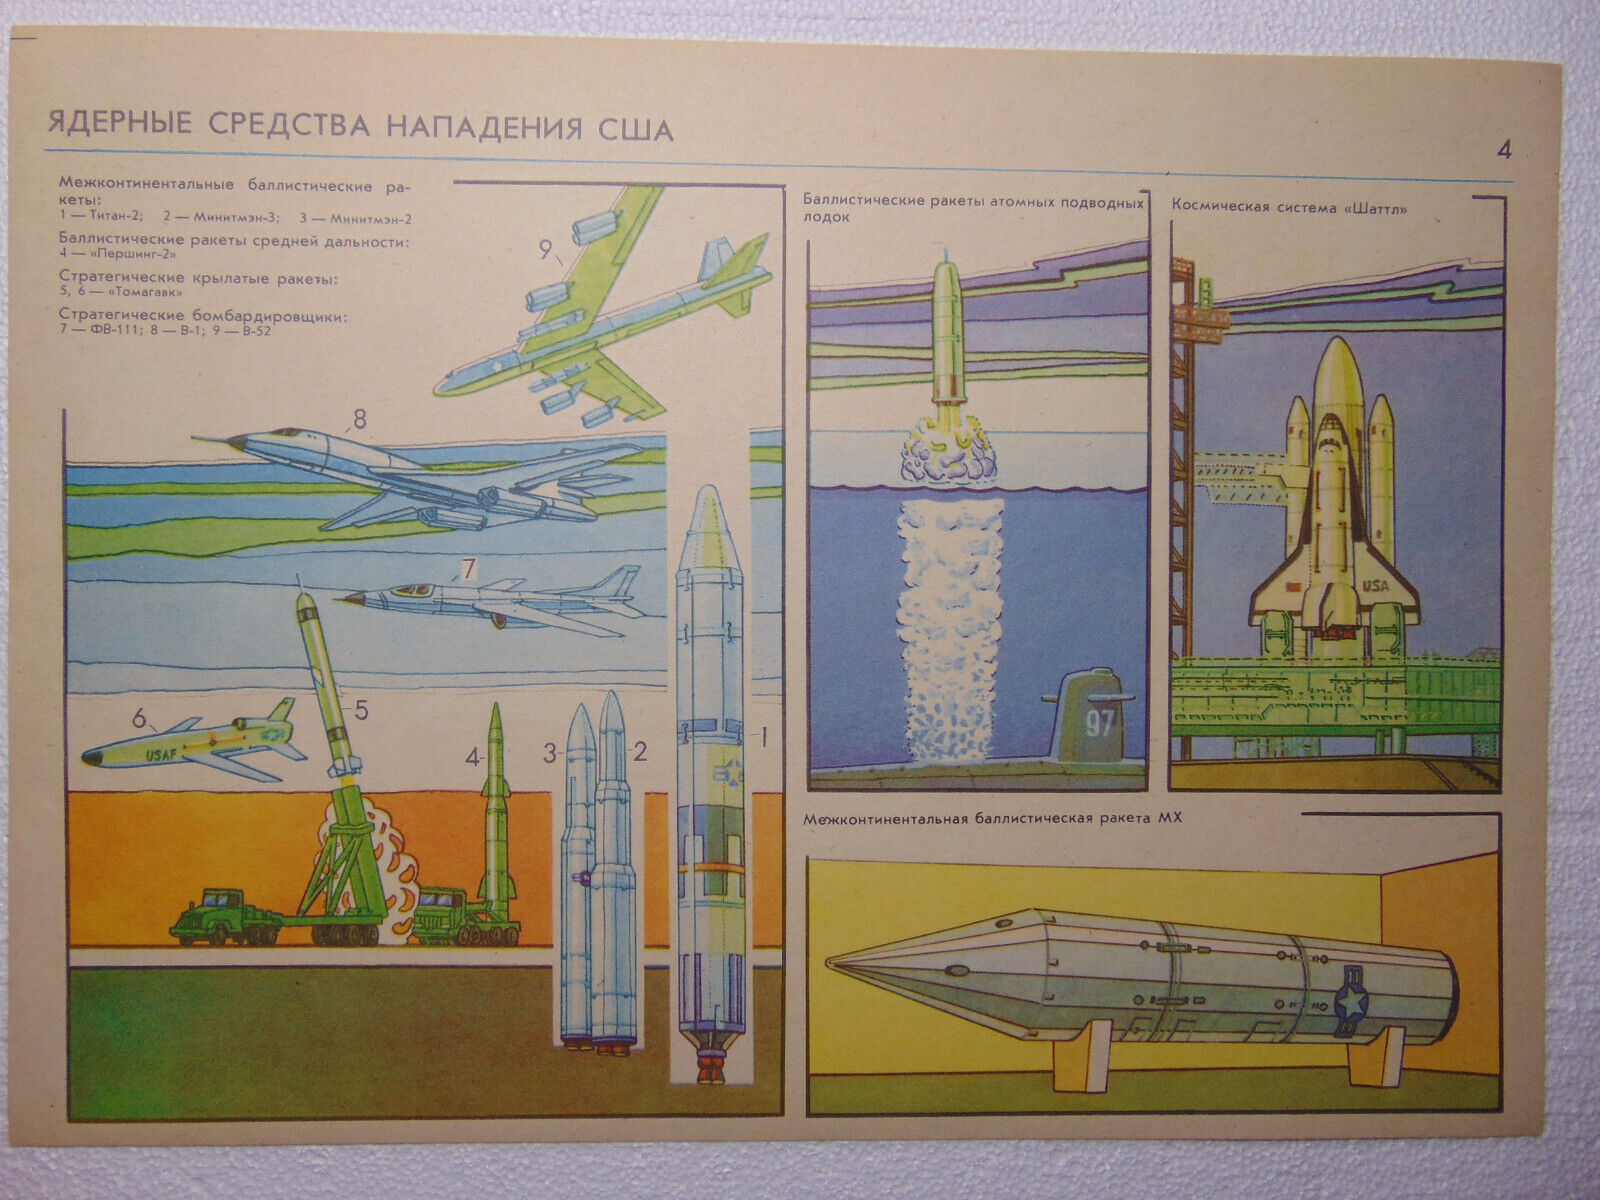 US Nuclear Attack Weapons Poster fallout Soviet radiation Chernobyl Atomic bomb